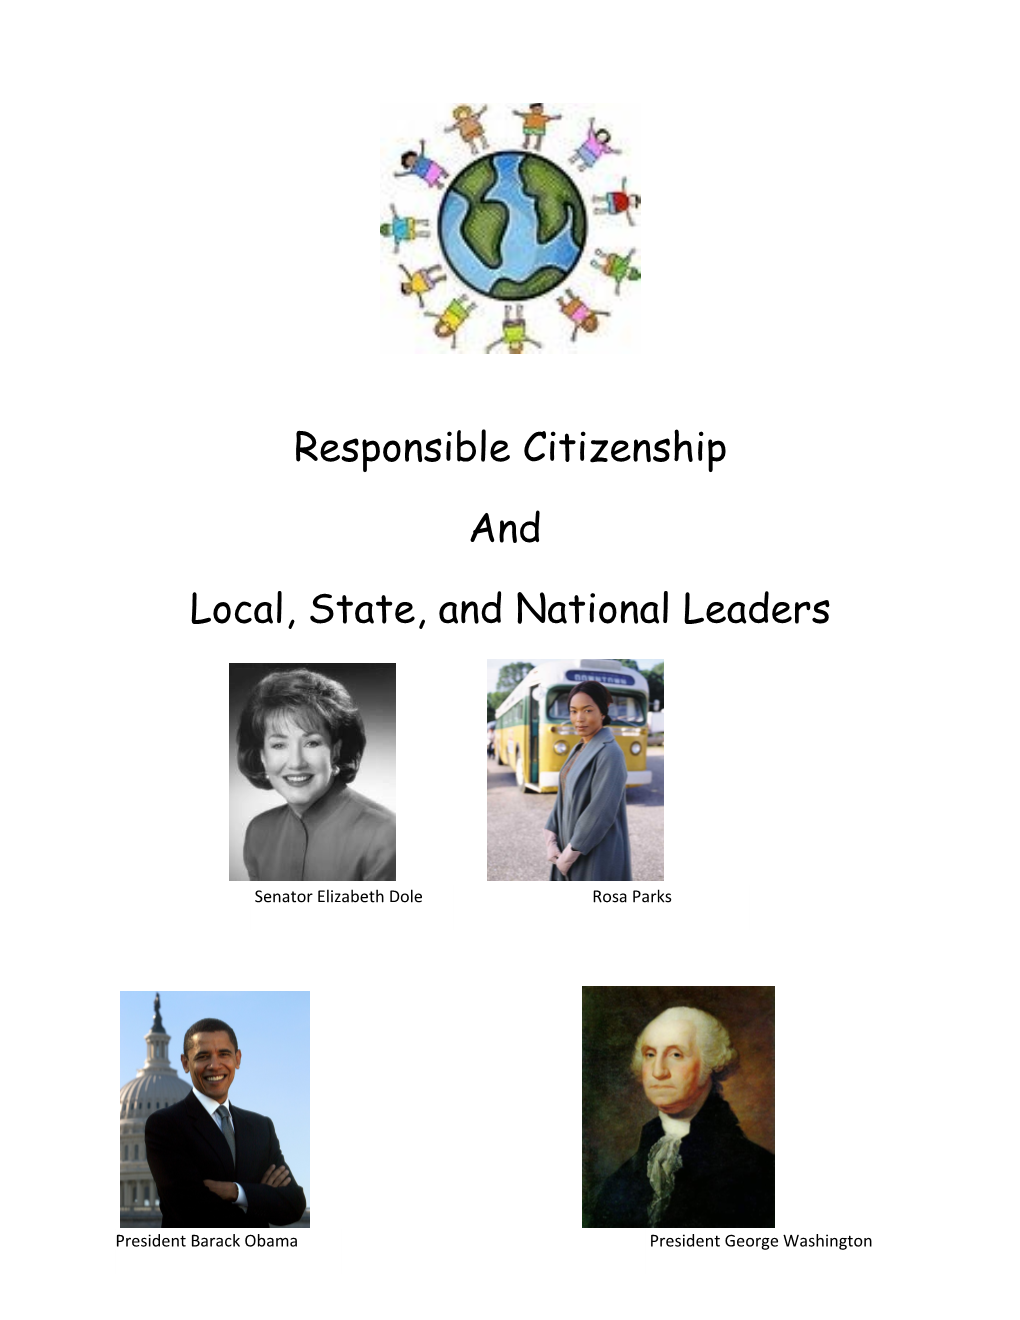 Local, State, and National Leaders